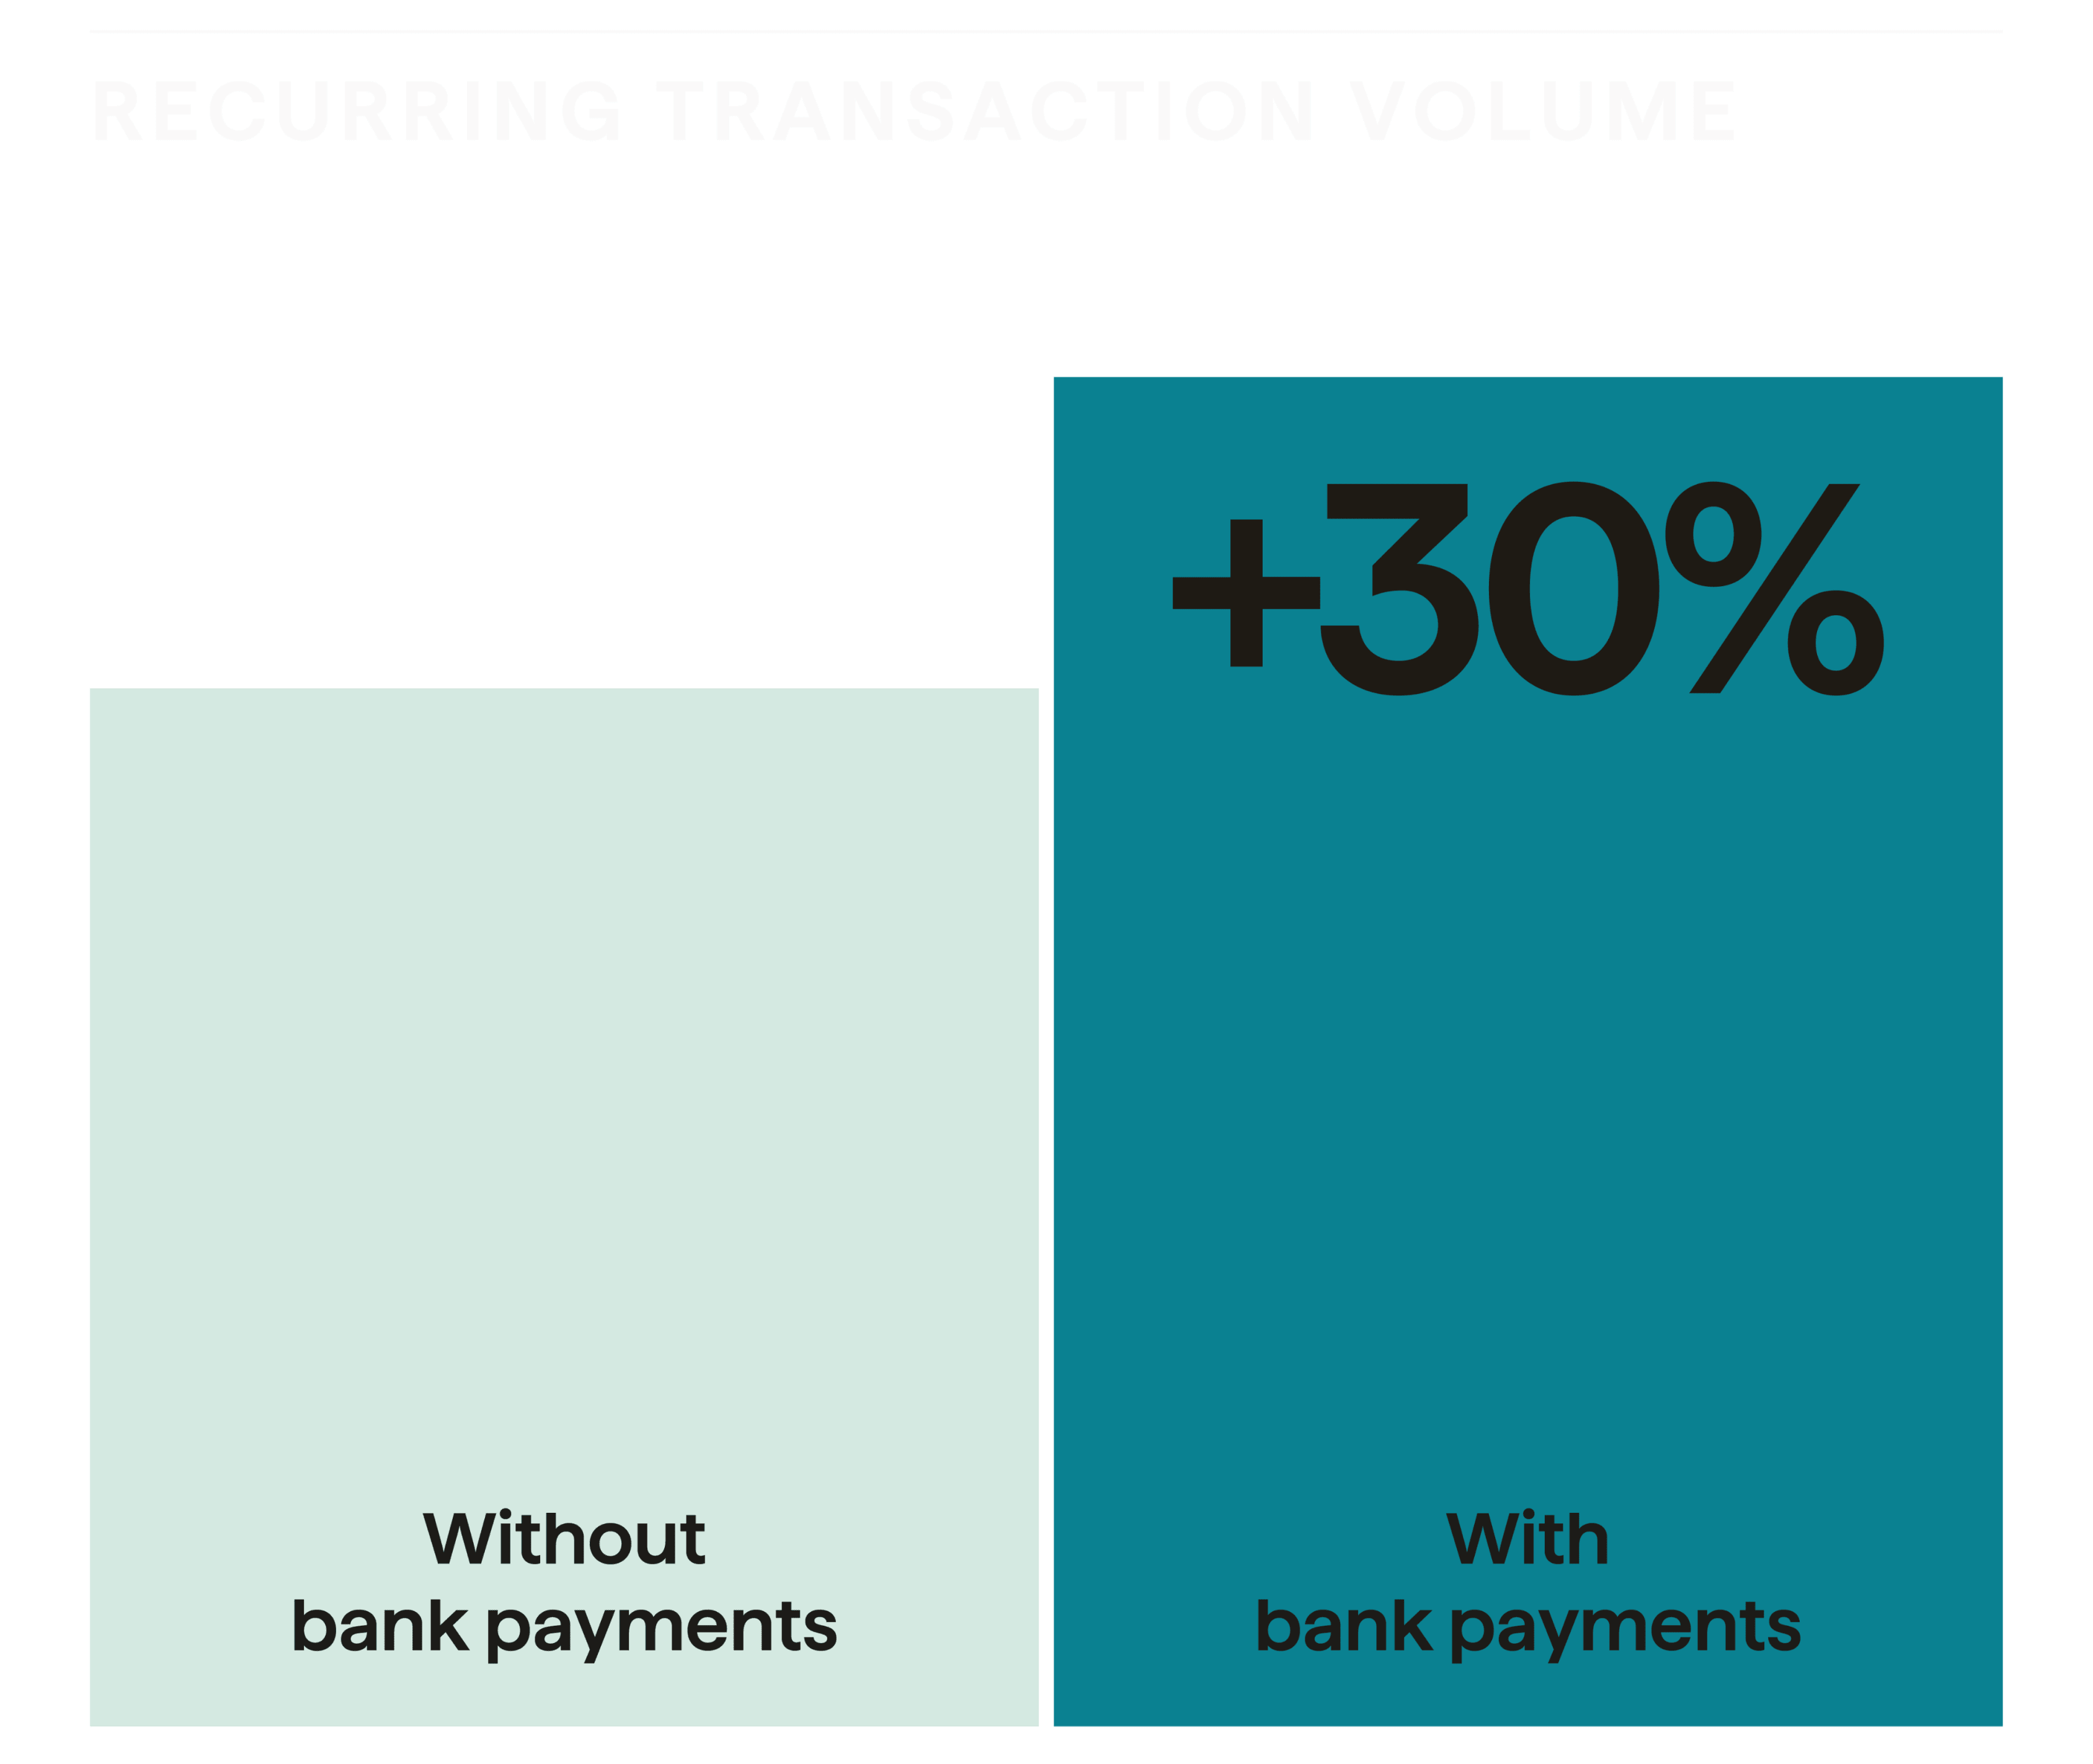 The value of bank payments